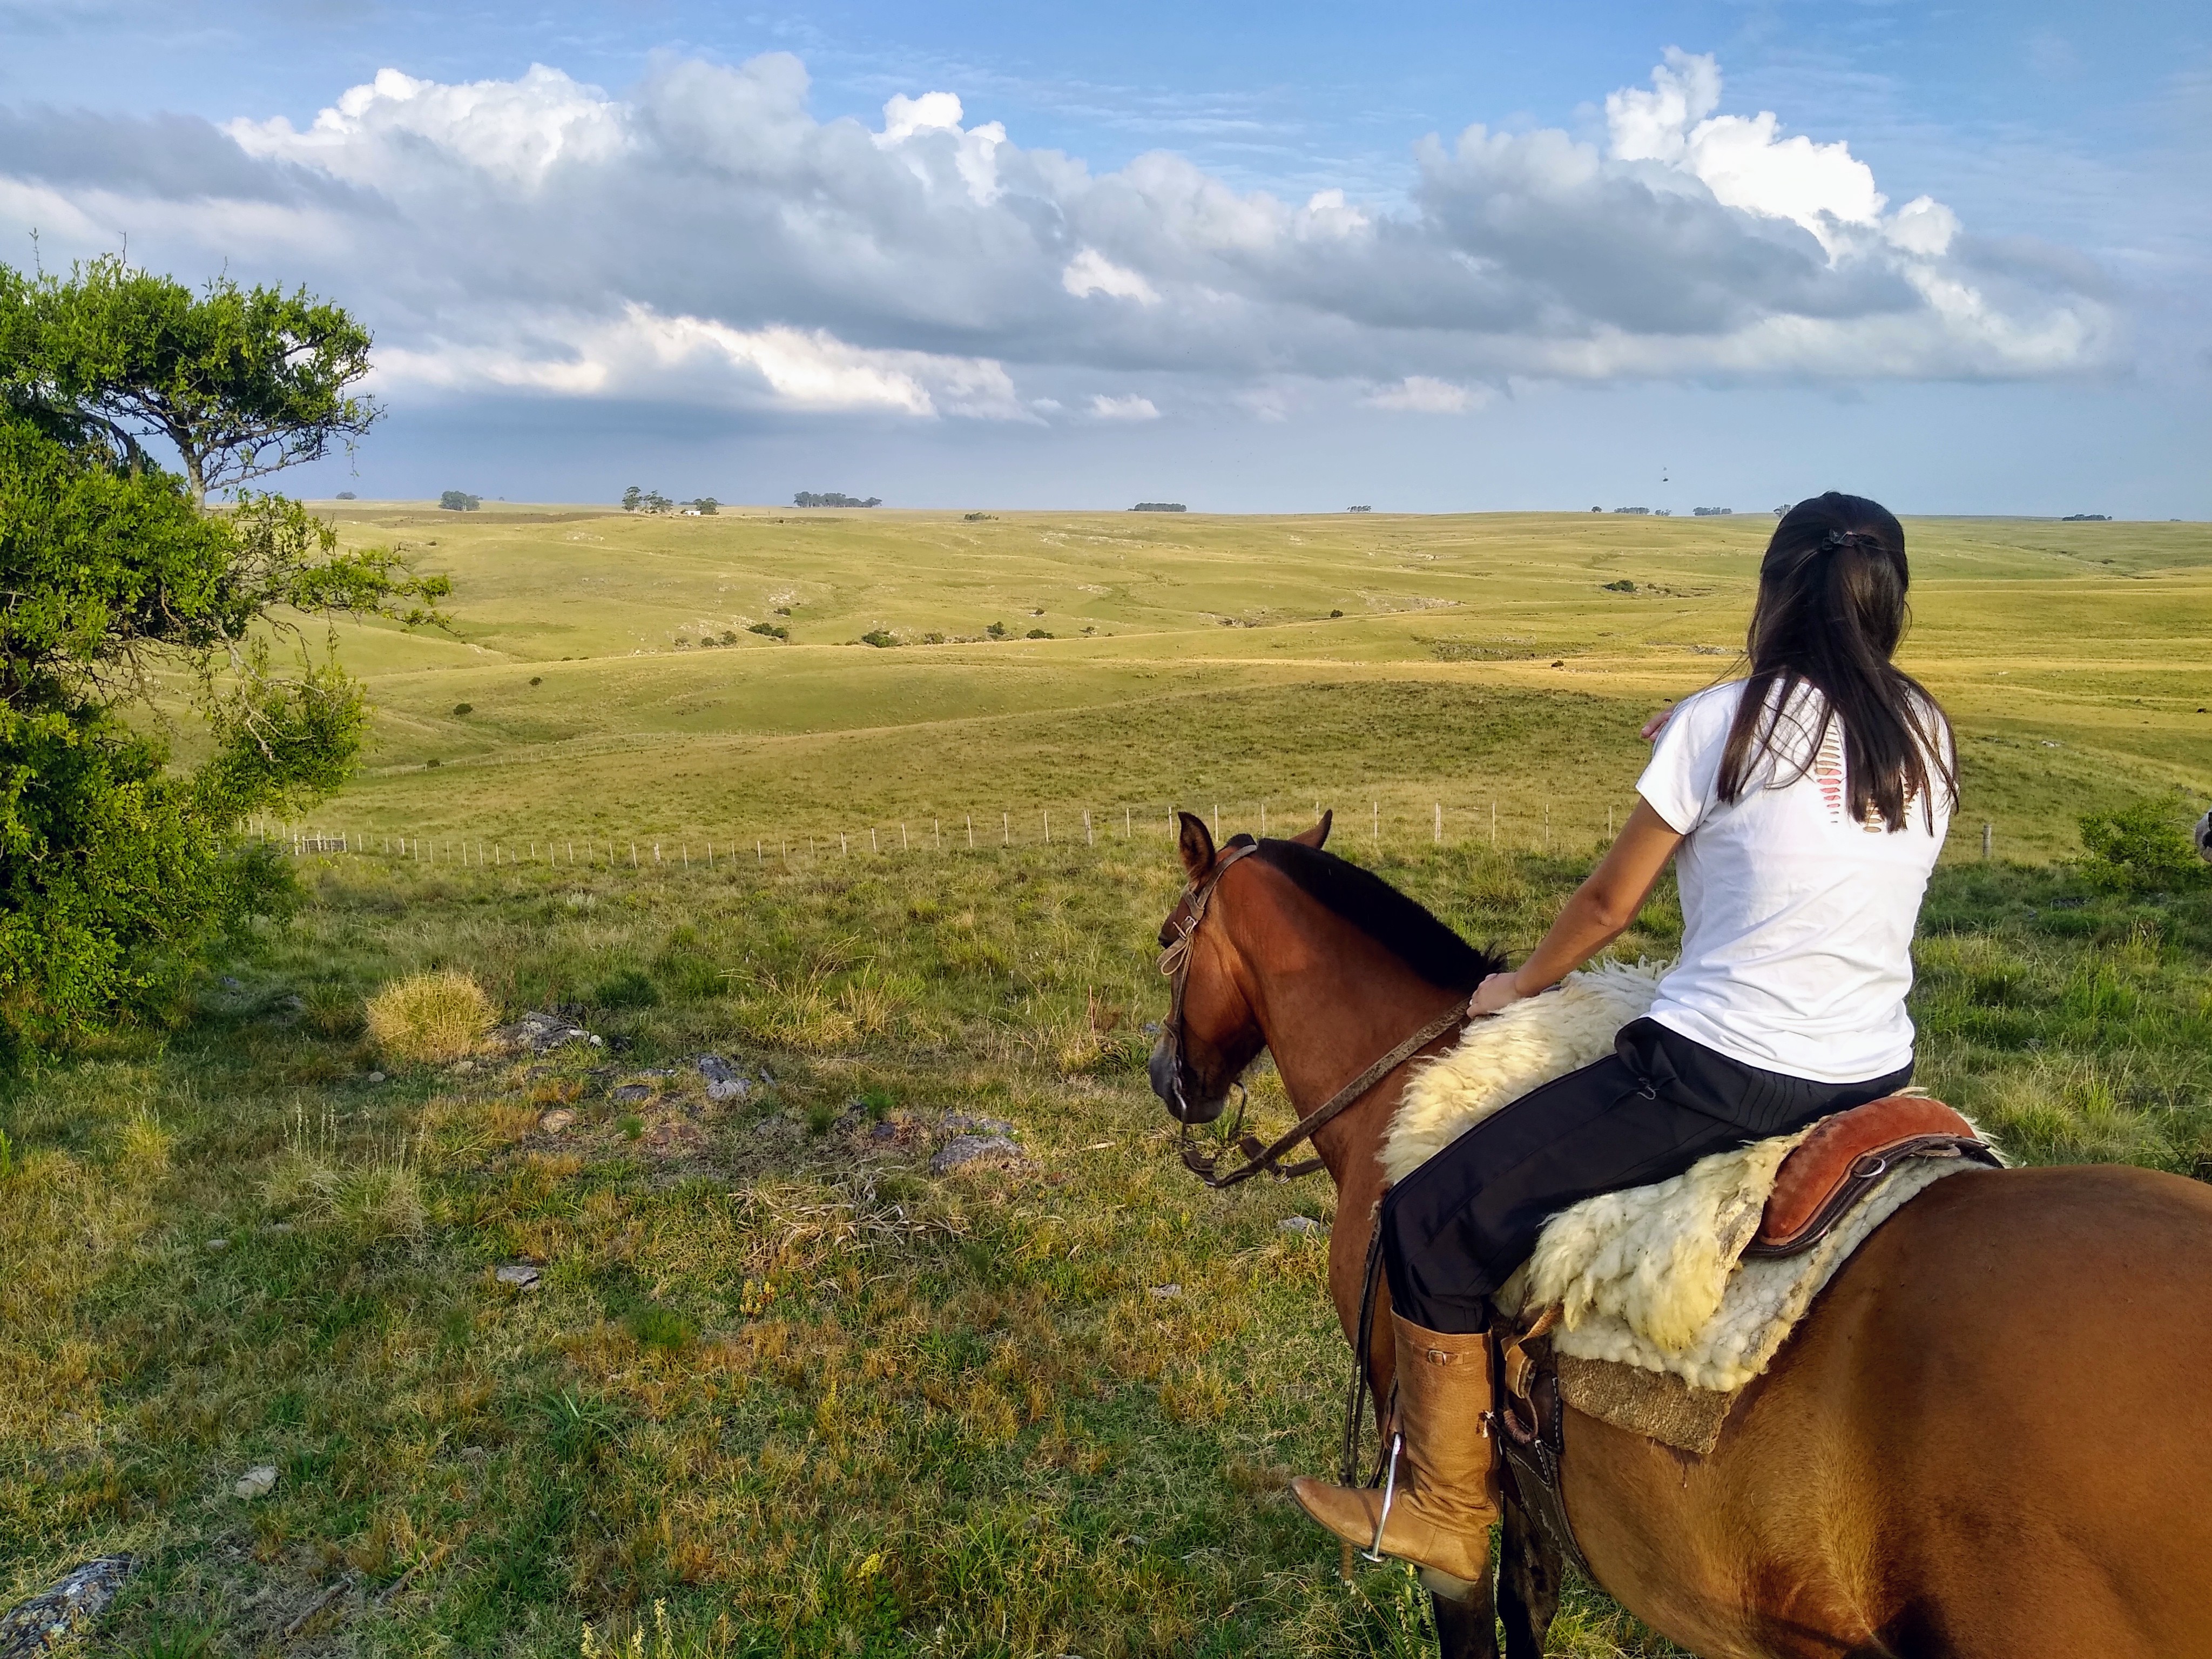 a young woman on horseback looks out across a green field with rolling hills